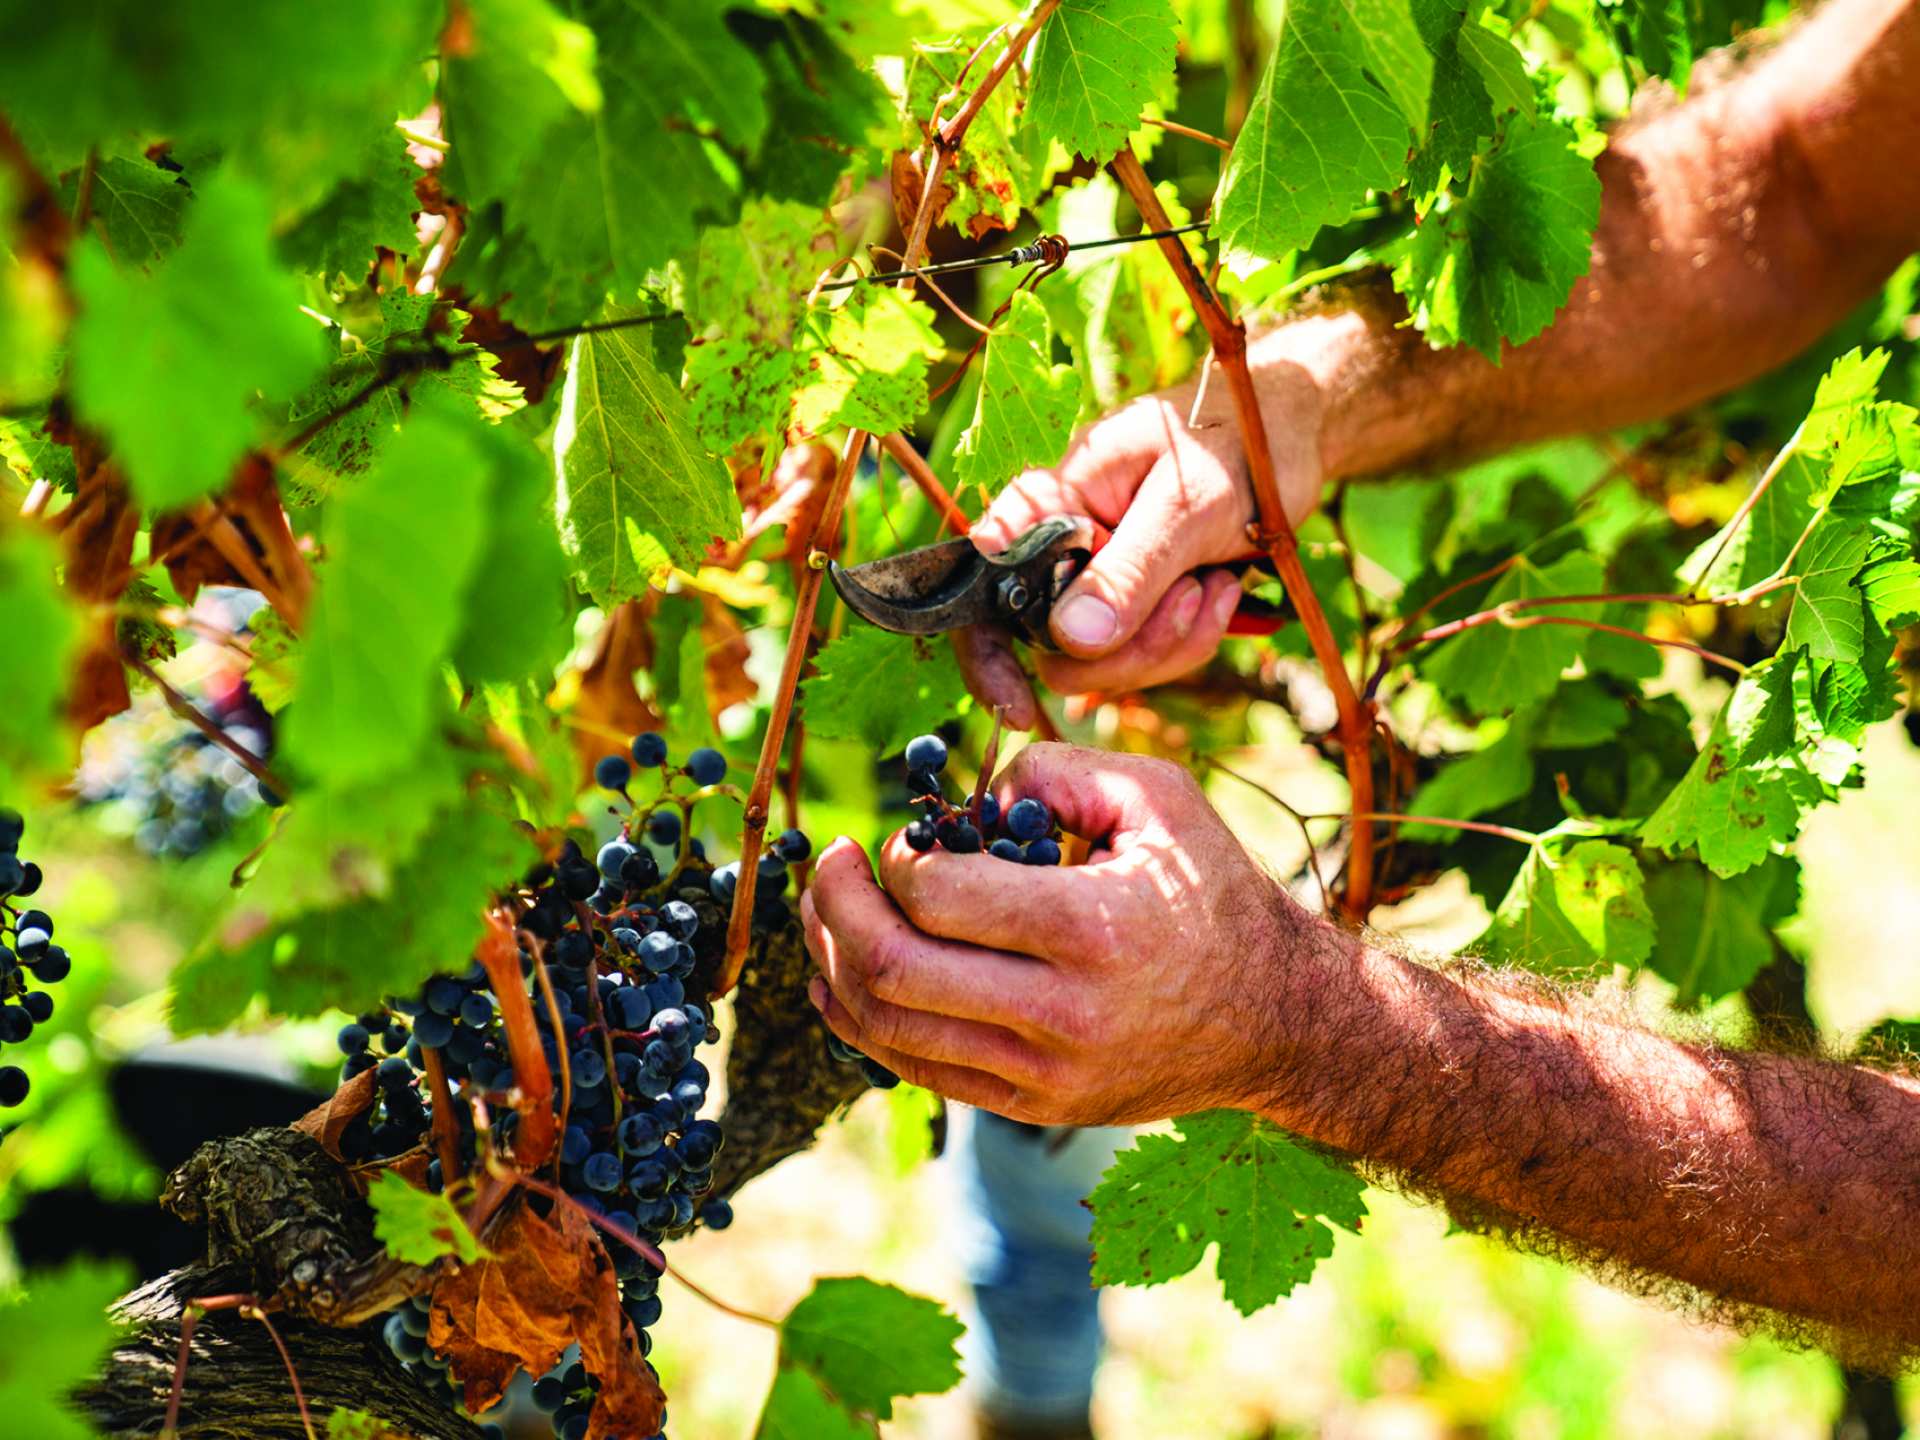 Clipping red grapes in a Sicilian vineyard